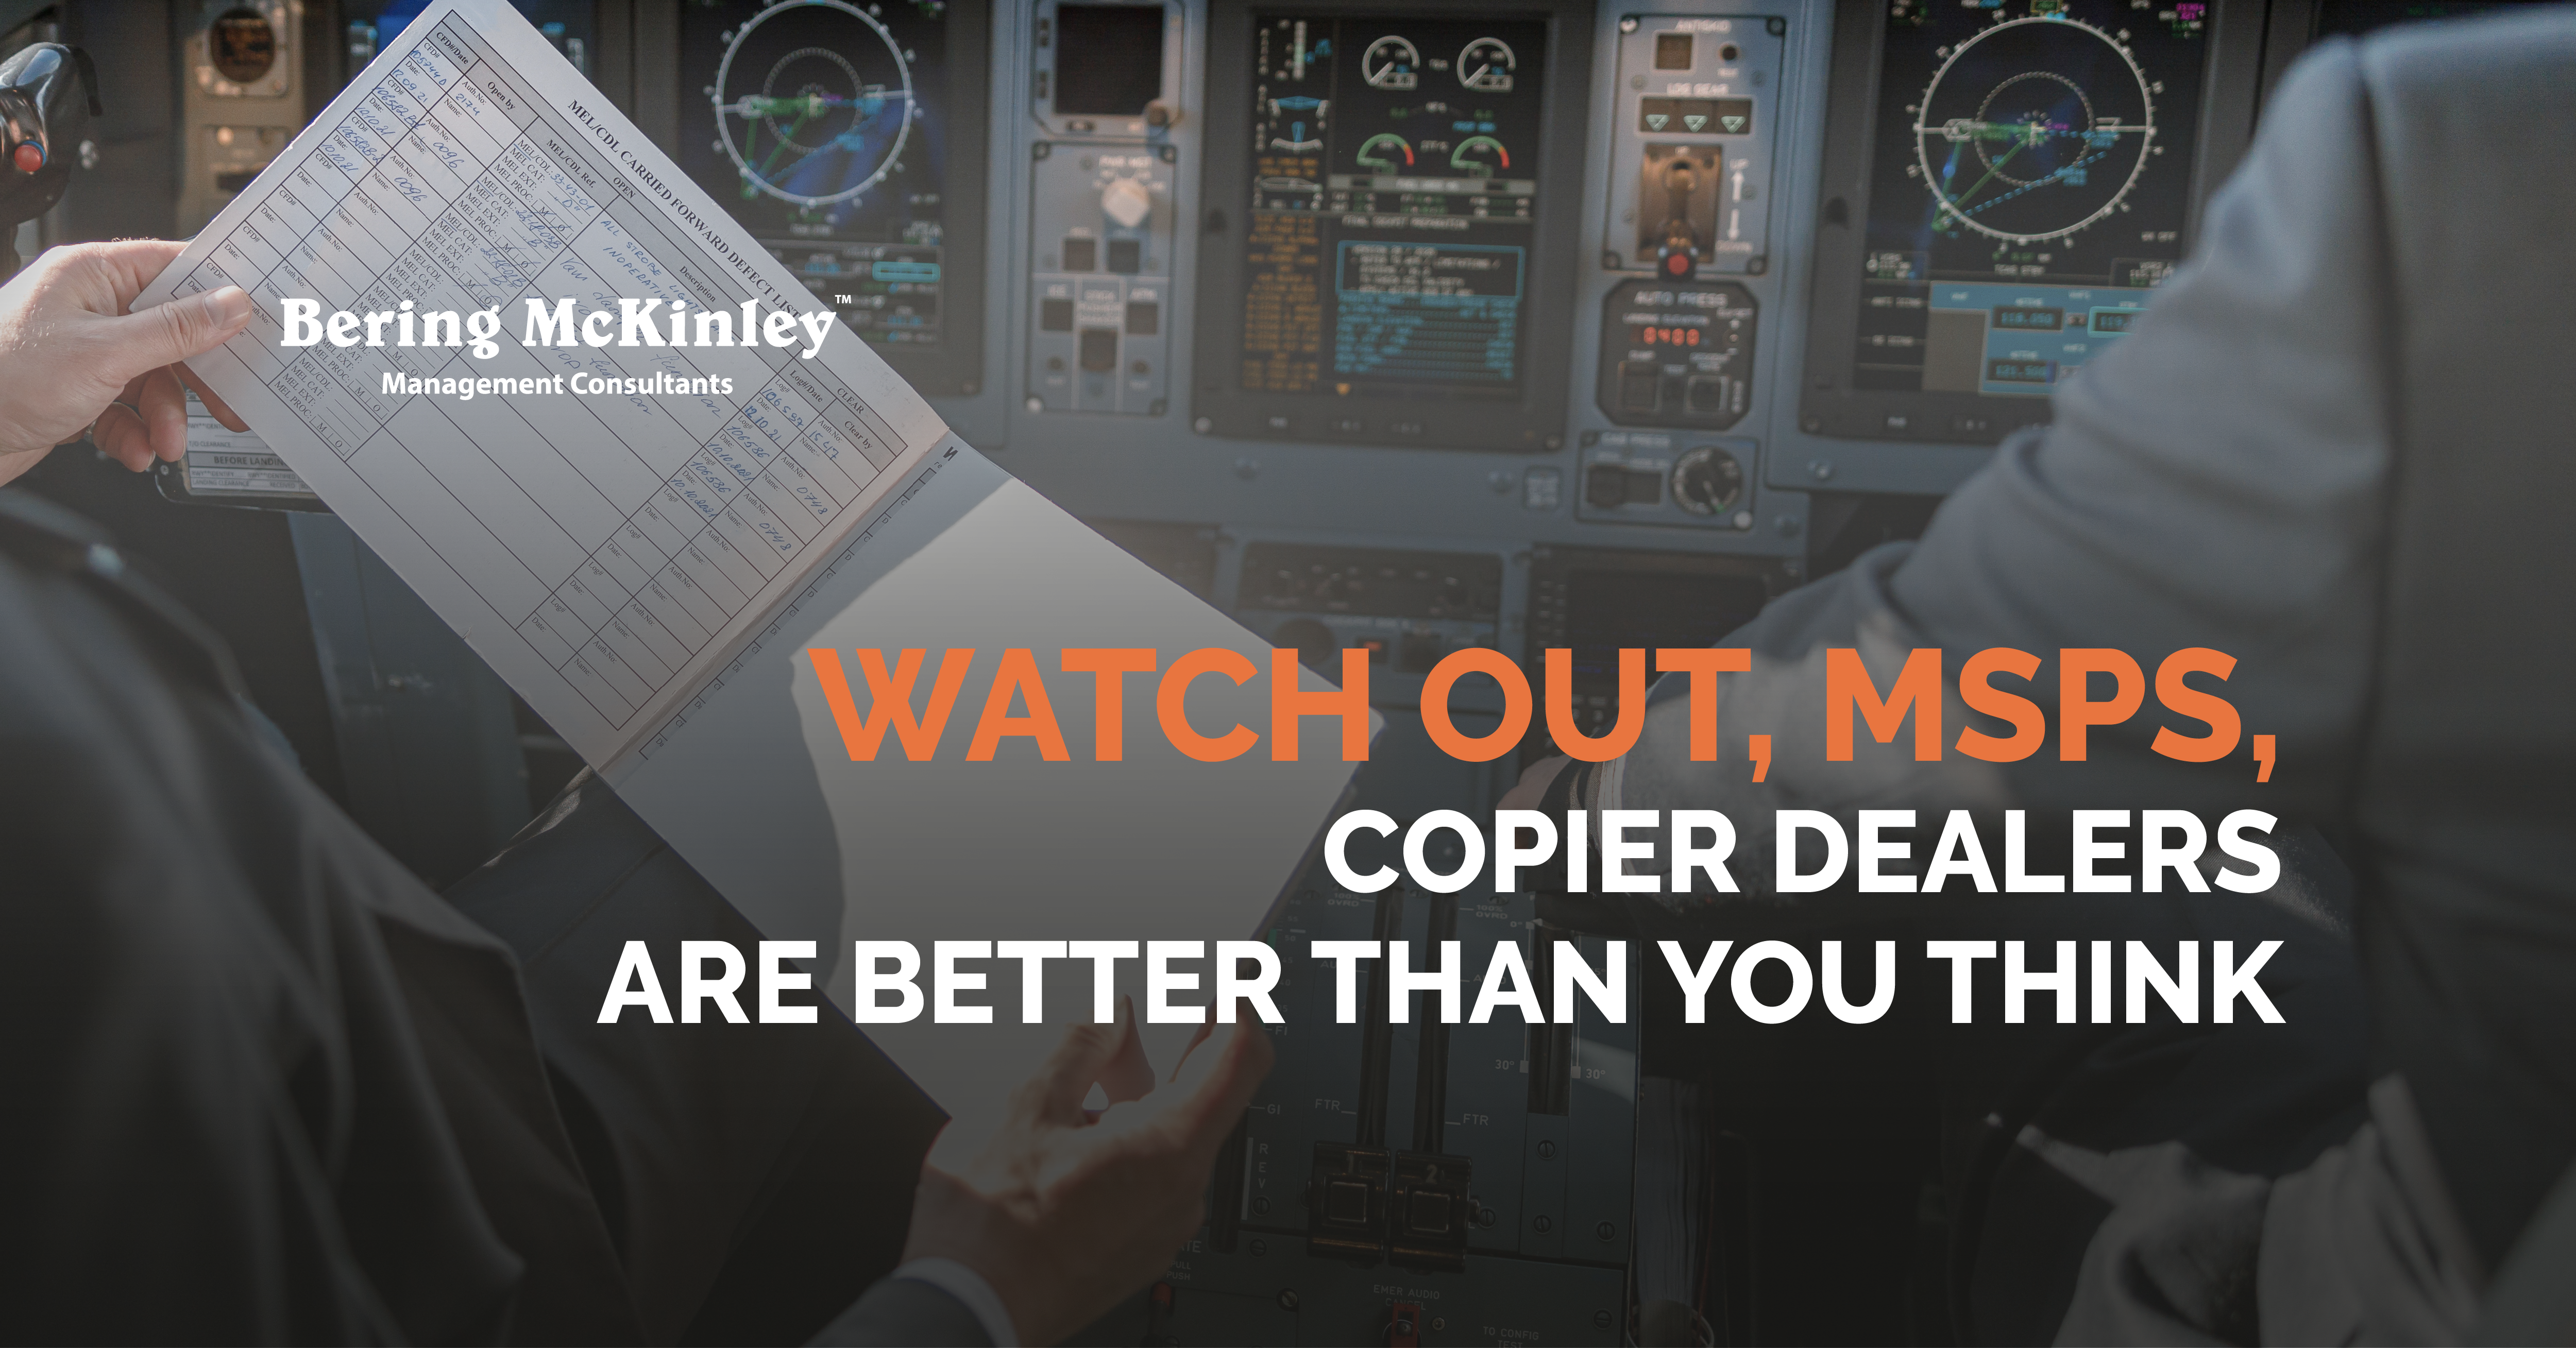 Watch out, MSPs, Copier Dealers Are Better Than You Think